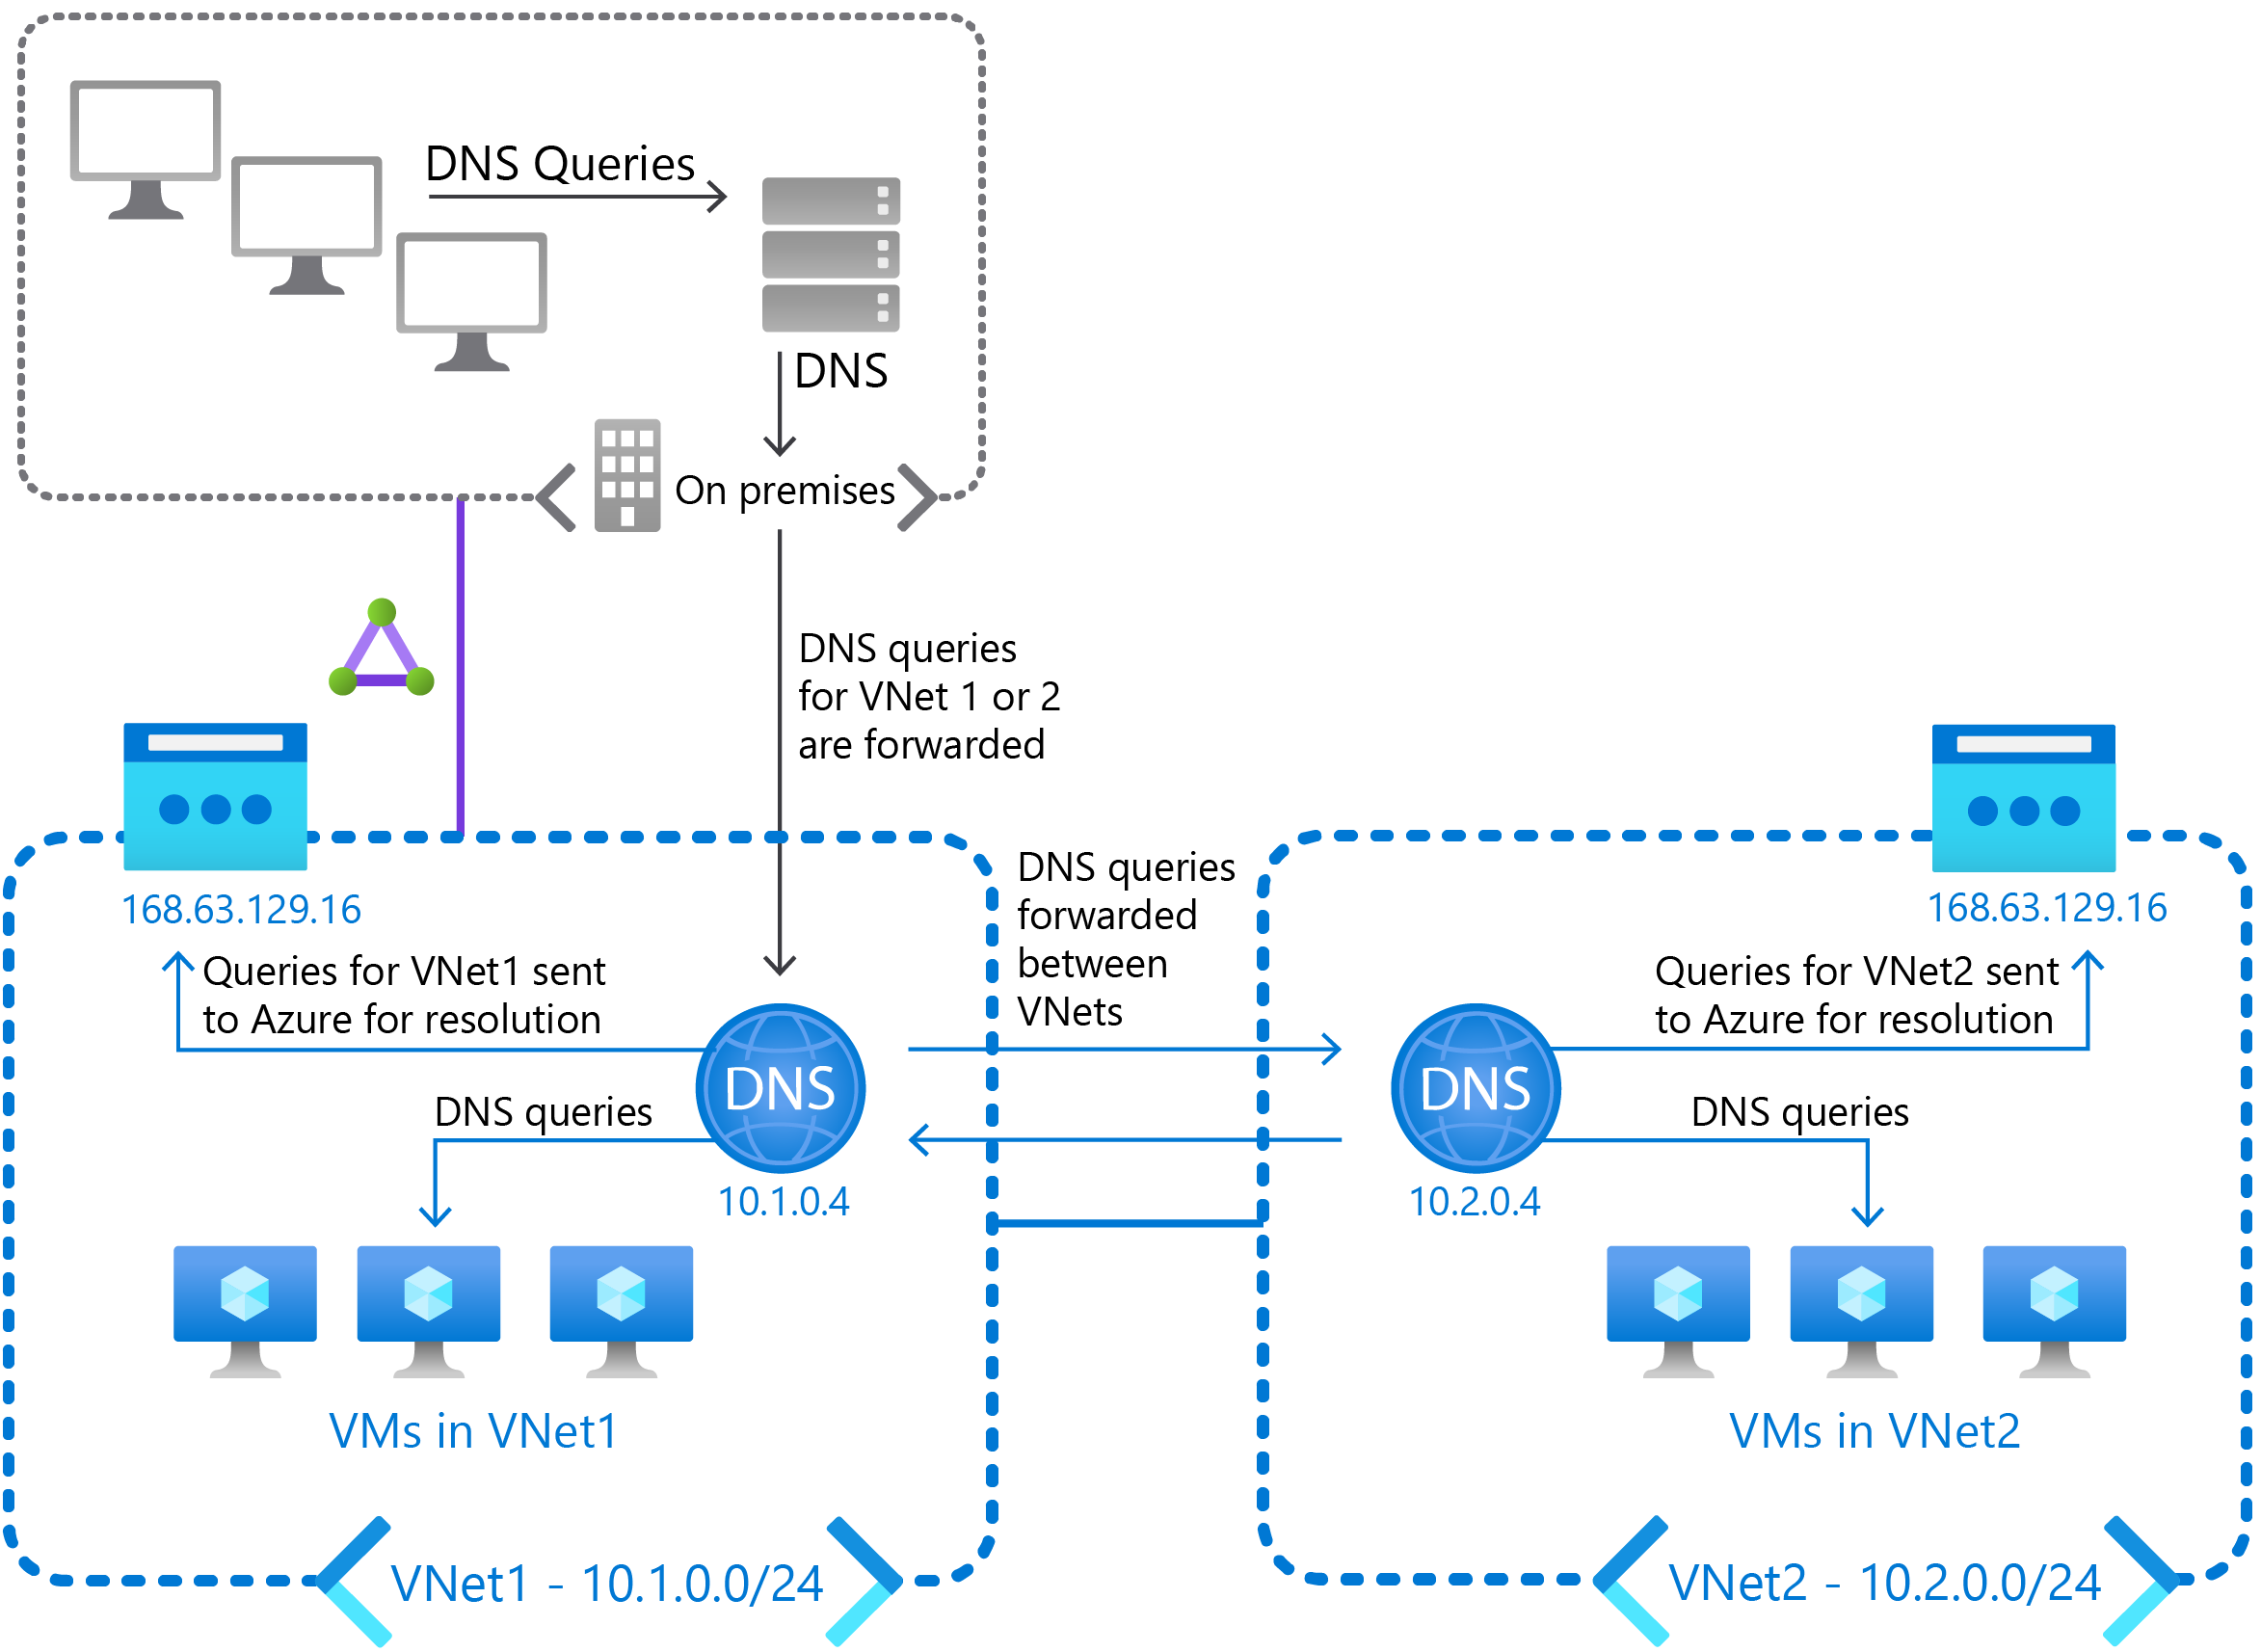 A diagram demonstrates DNS resolution between VNets using this method. Two VNets labeled VNet1 and VNet2 are both configured with a DNS server. Queries for VNet1 and VNet2 from on-premises clients are forwarded to these DNS servers. Queries are forwarded between these two DNS servers, and also to Azure DNS.